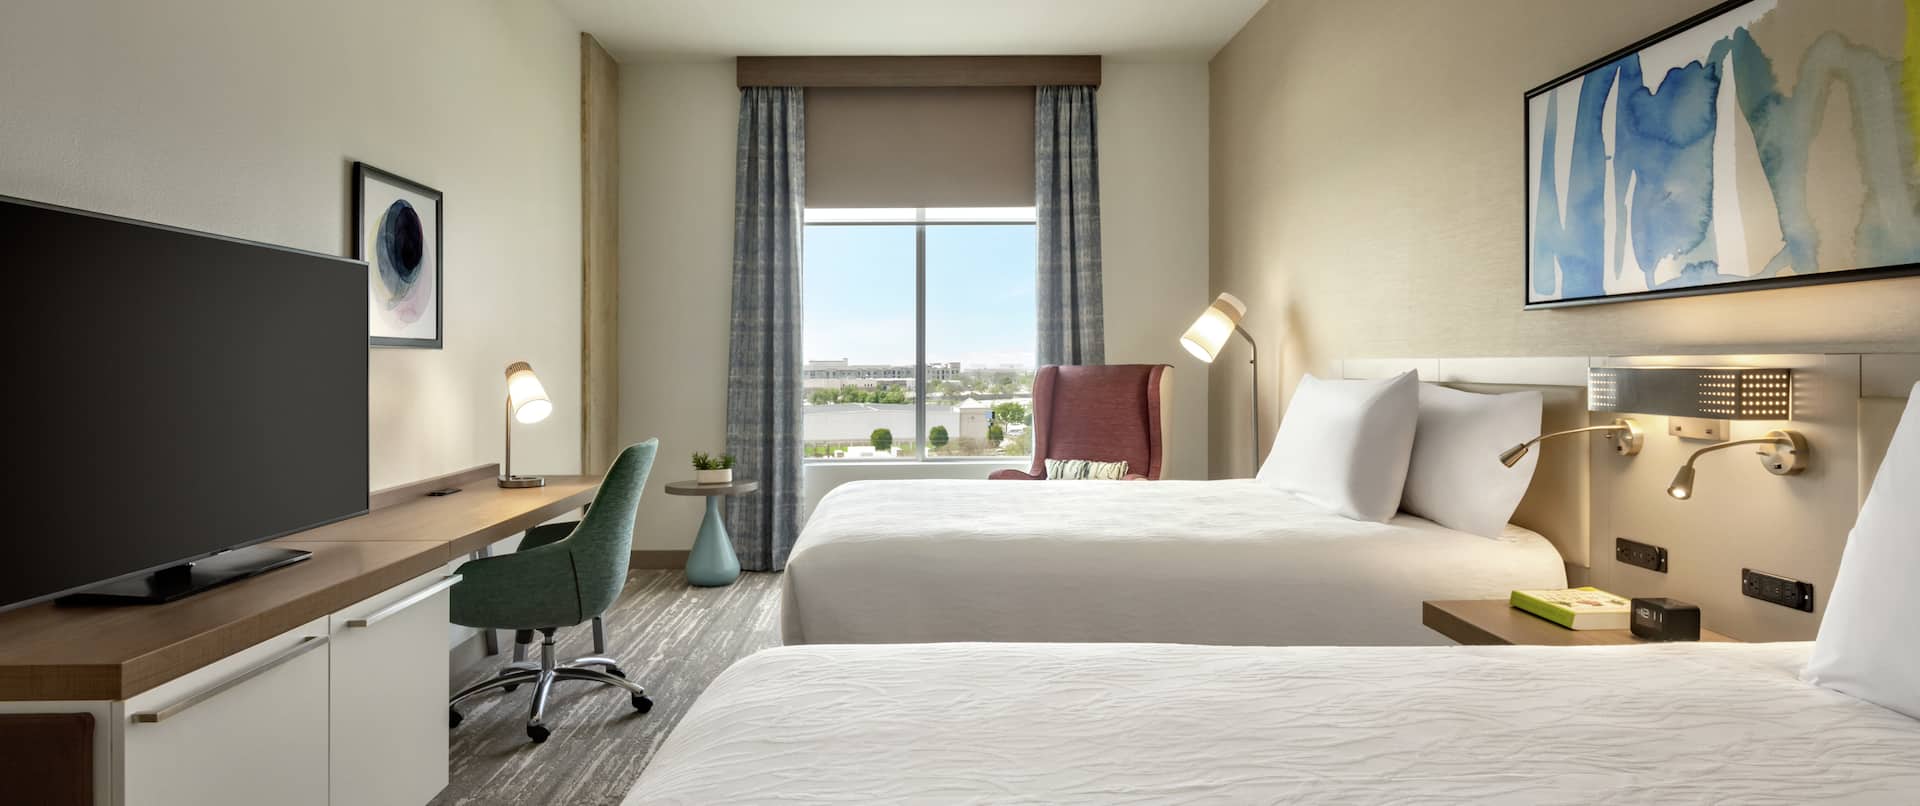 Spacious guest room featuring two comfortable queen beds, TV, work desk, and beautiful outside view.